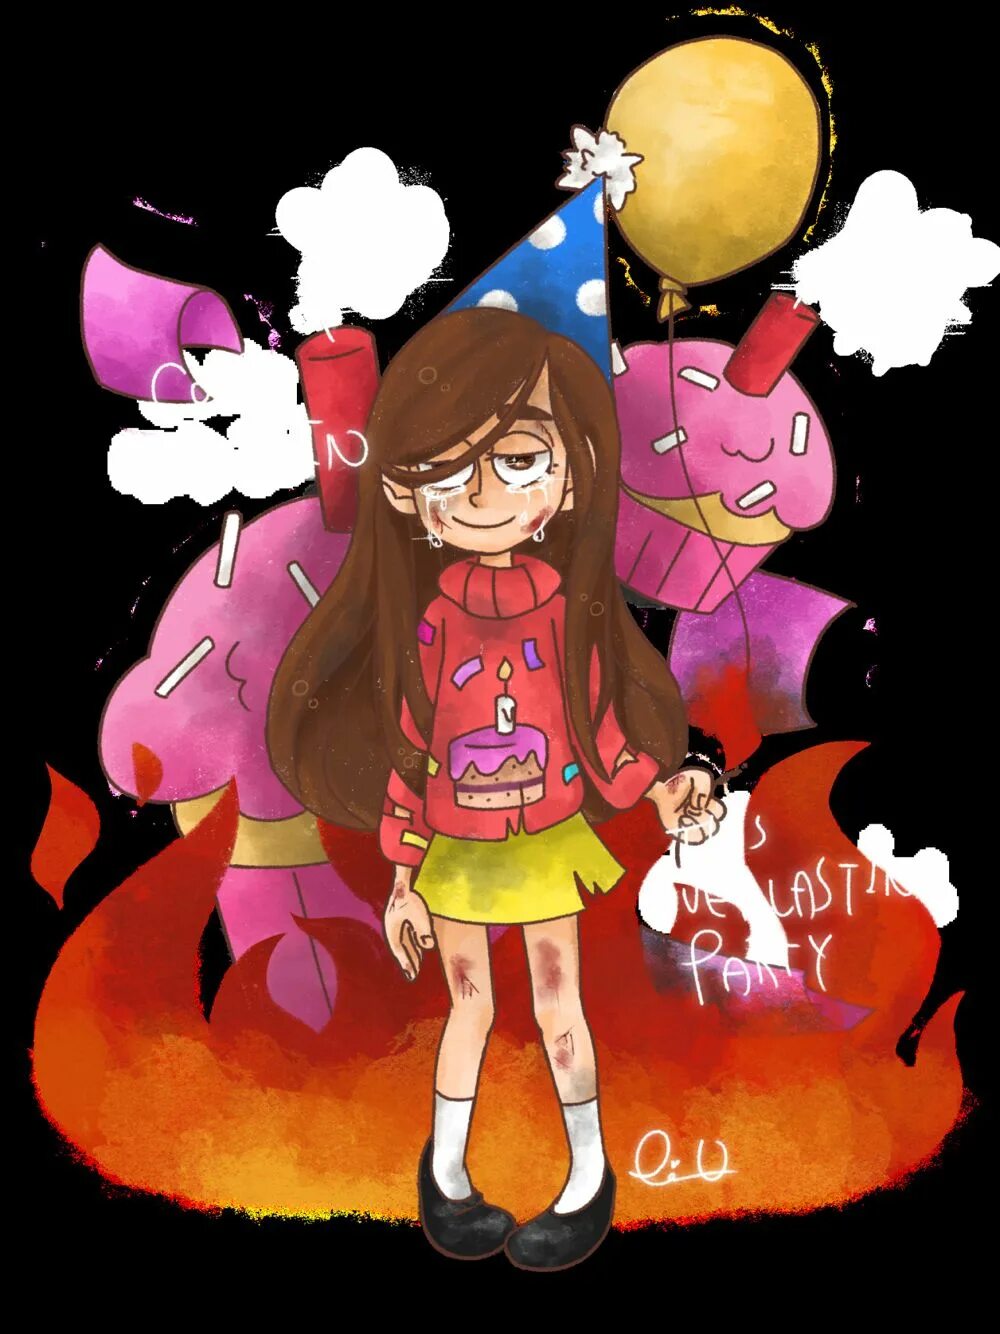 Bad end friends. Bad end friends Мэйбл. Именинница Мейбл Bad end. Mabel именинница Bad end friends. Мейбл Пайнс Bad end friends.